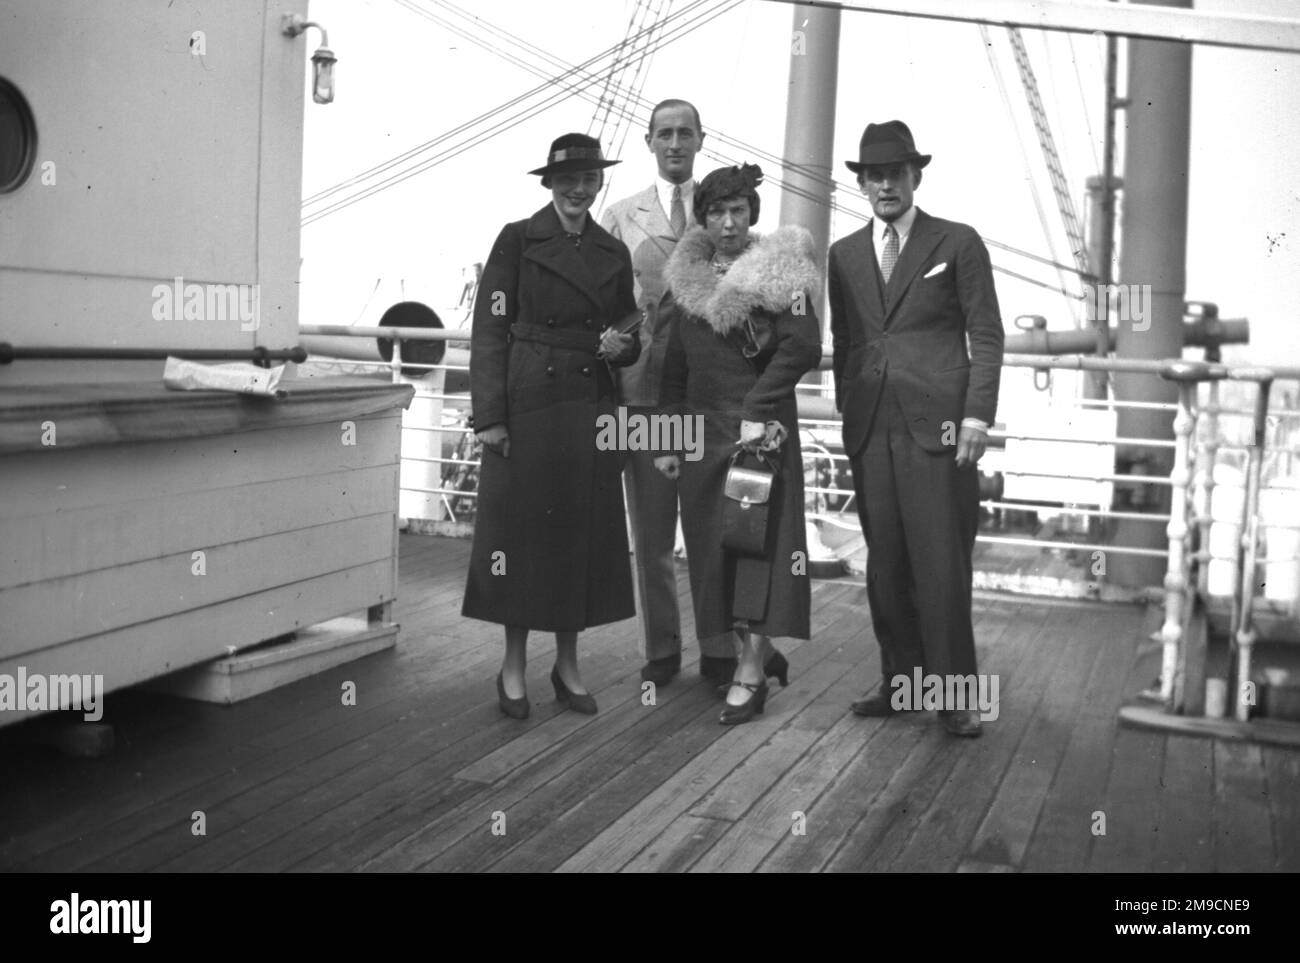 A group of four people on board a ship Stock Photo